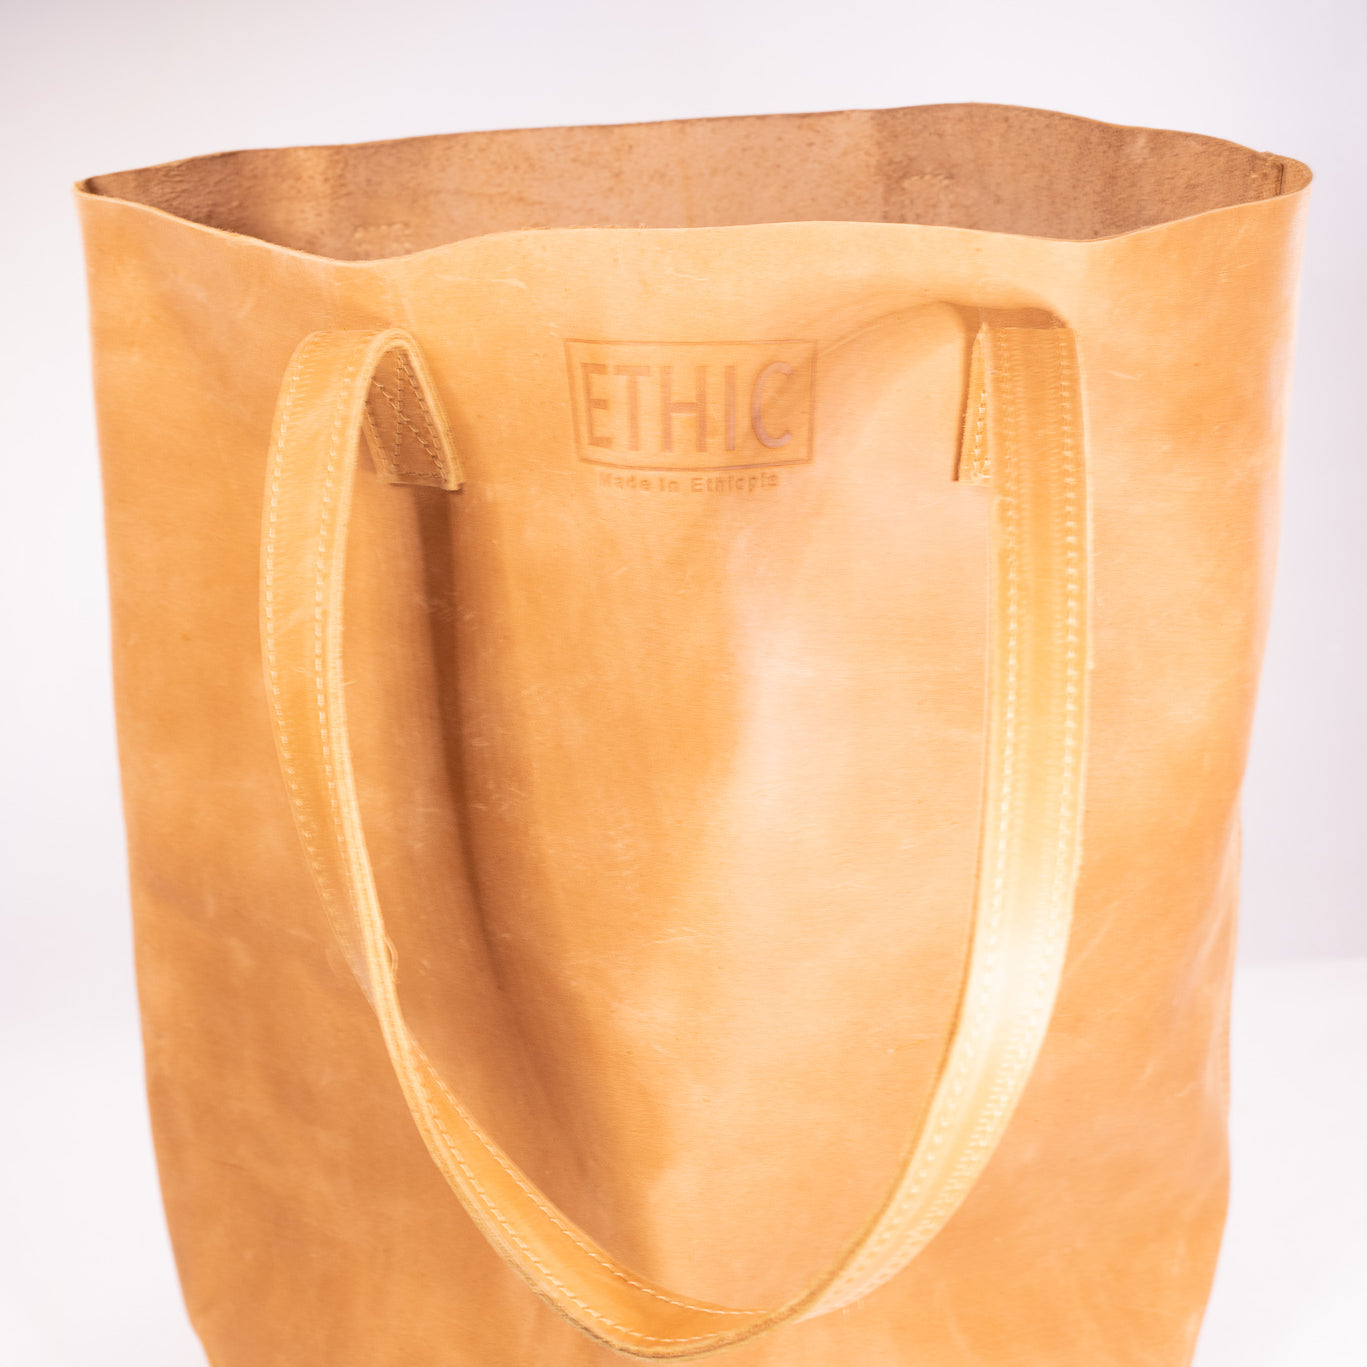 Ethic Leather Classic Tote